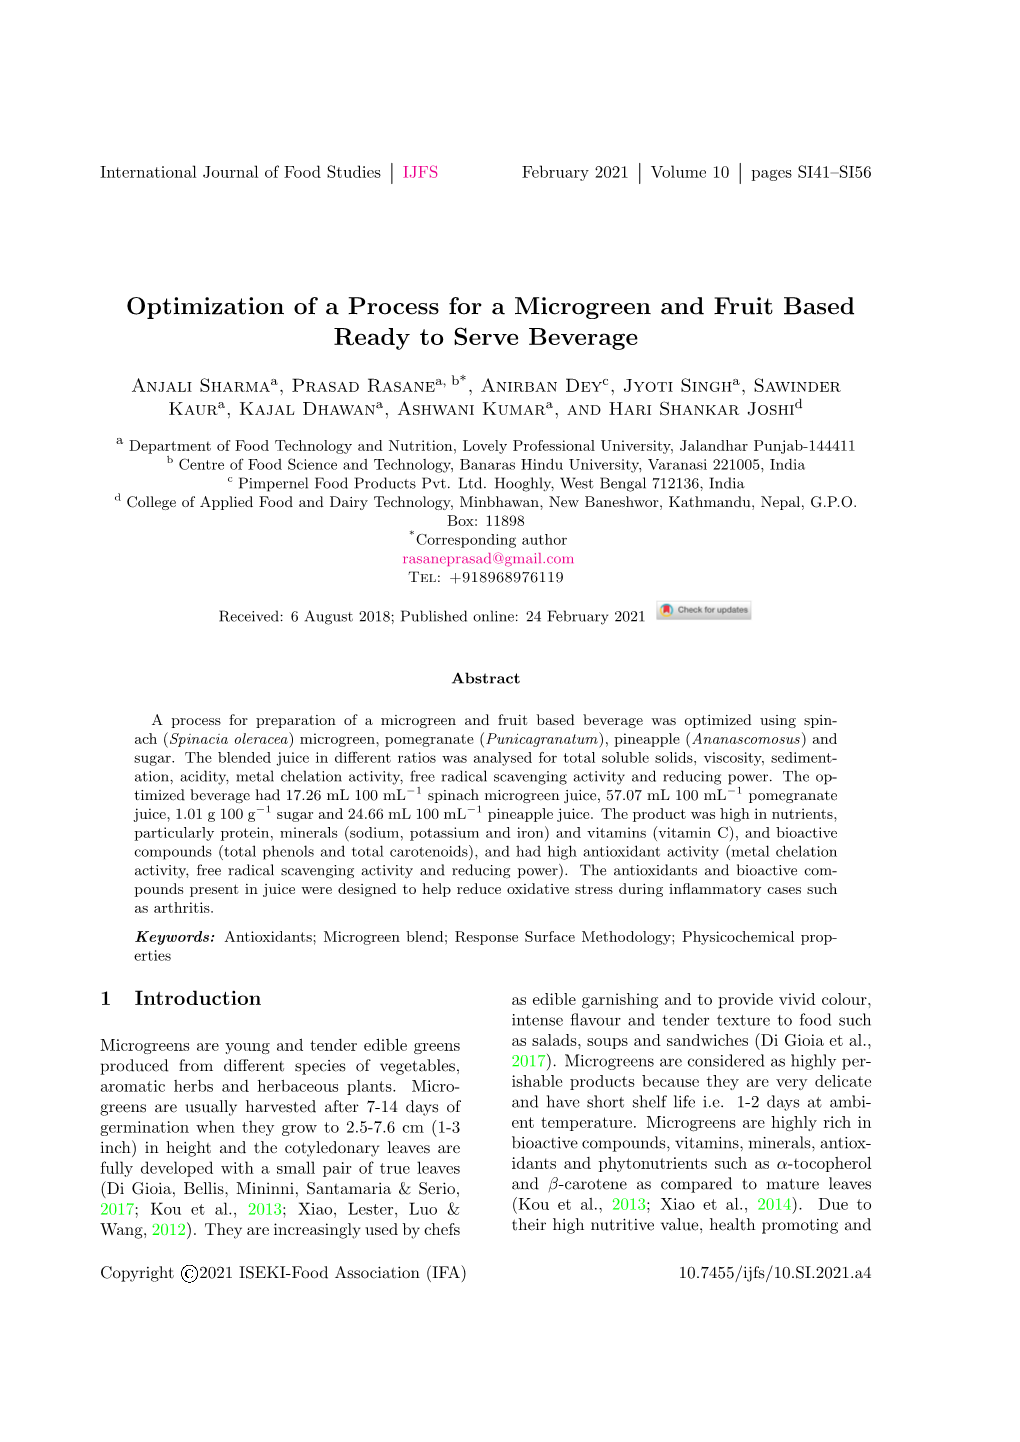 Optimization of a Process for a Microgreen and Fruit Based Ready to Serve Beverage